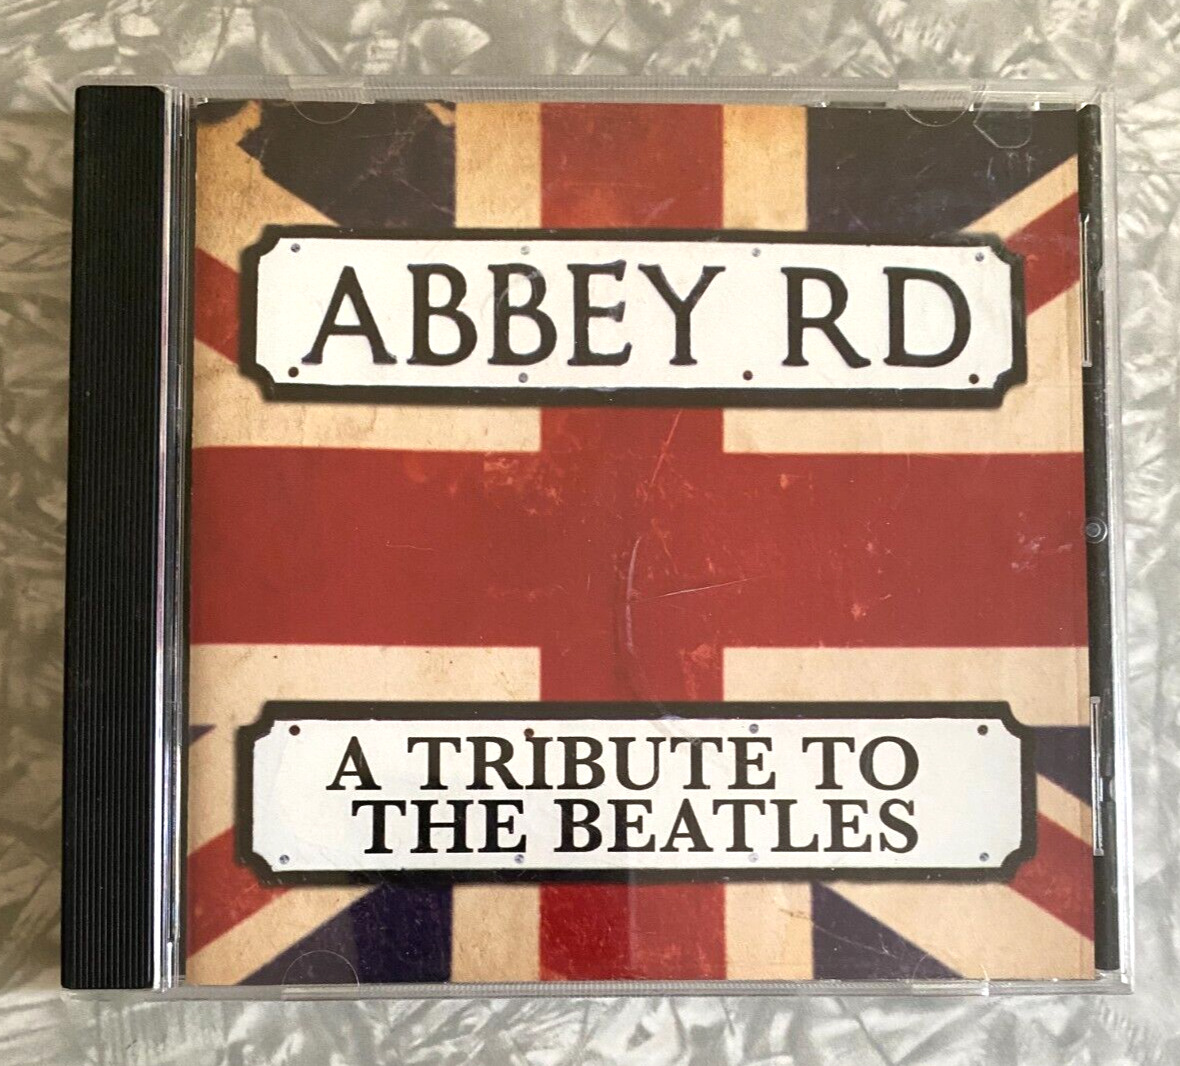 Abbey Road Tribute To The Beatles by St Martin Orchestra of Los Angeles 2009